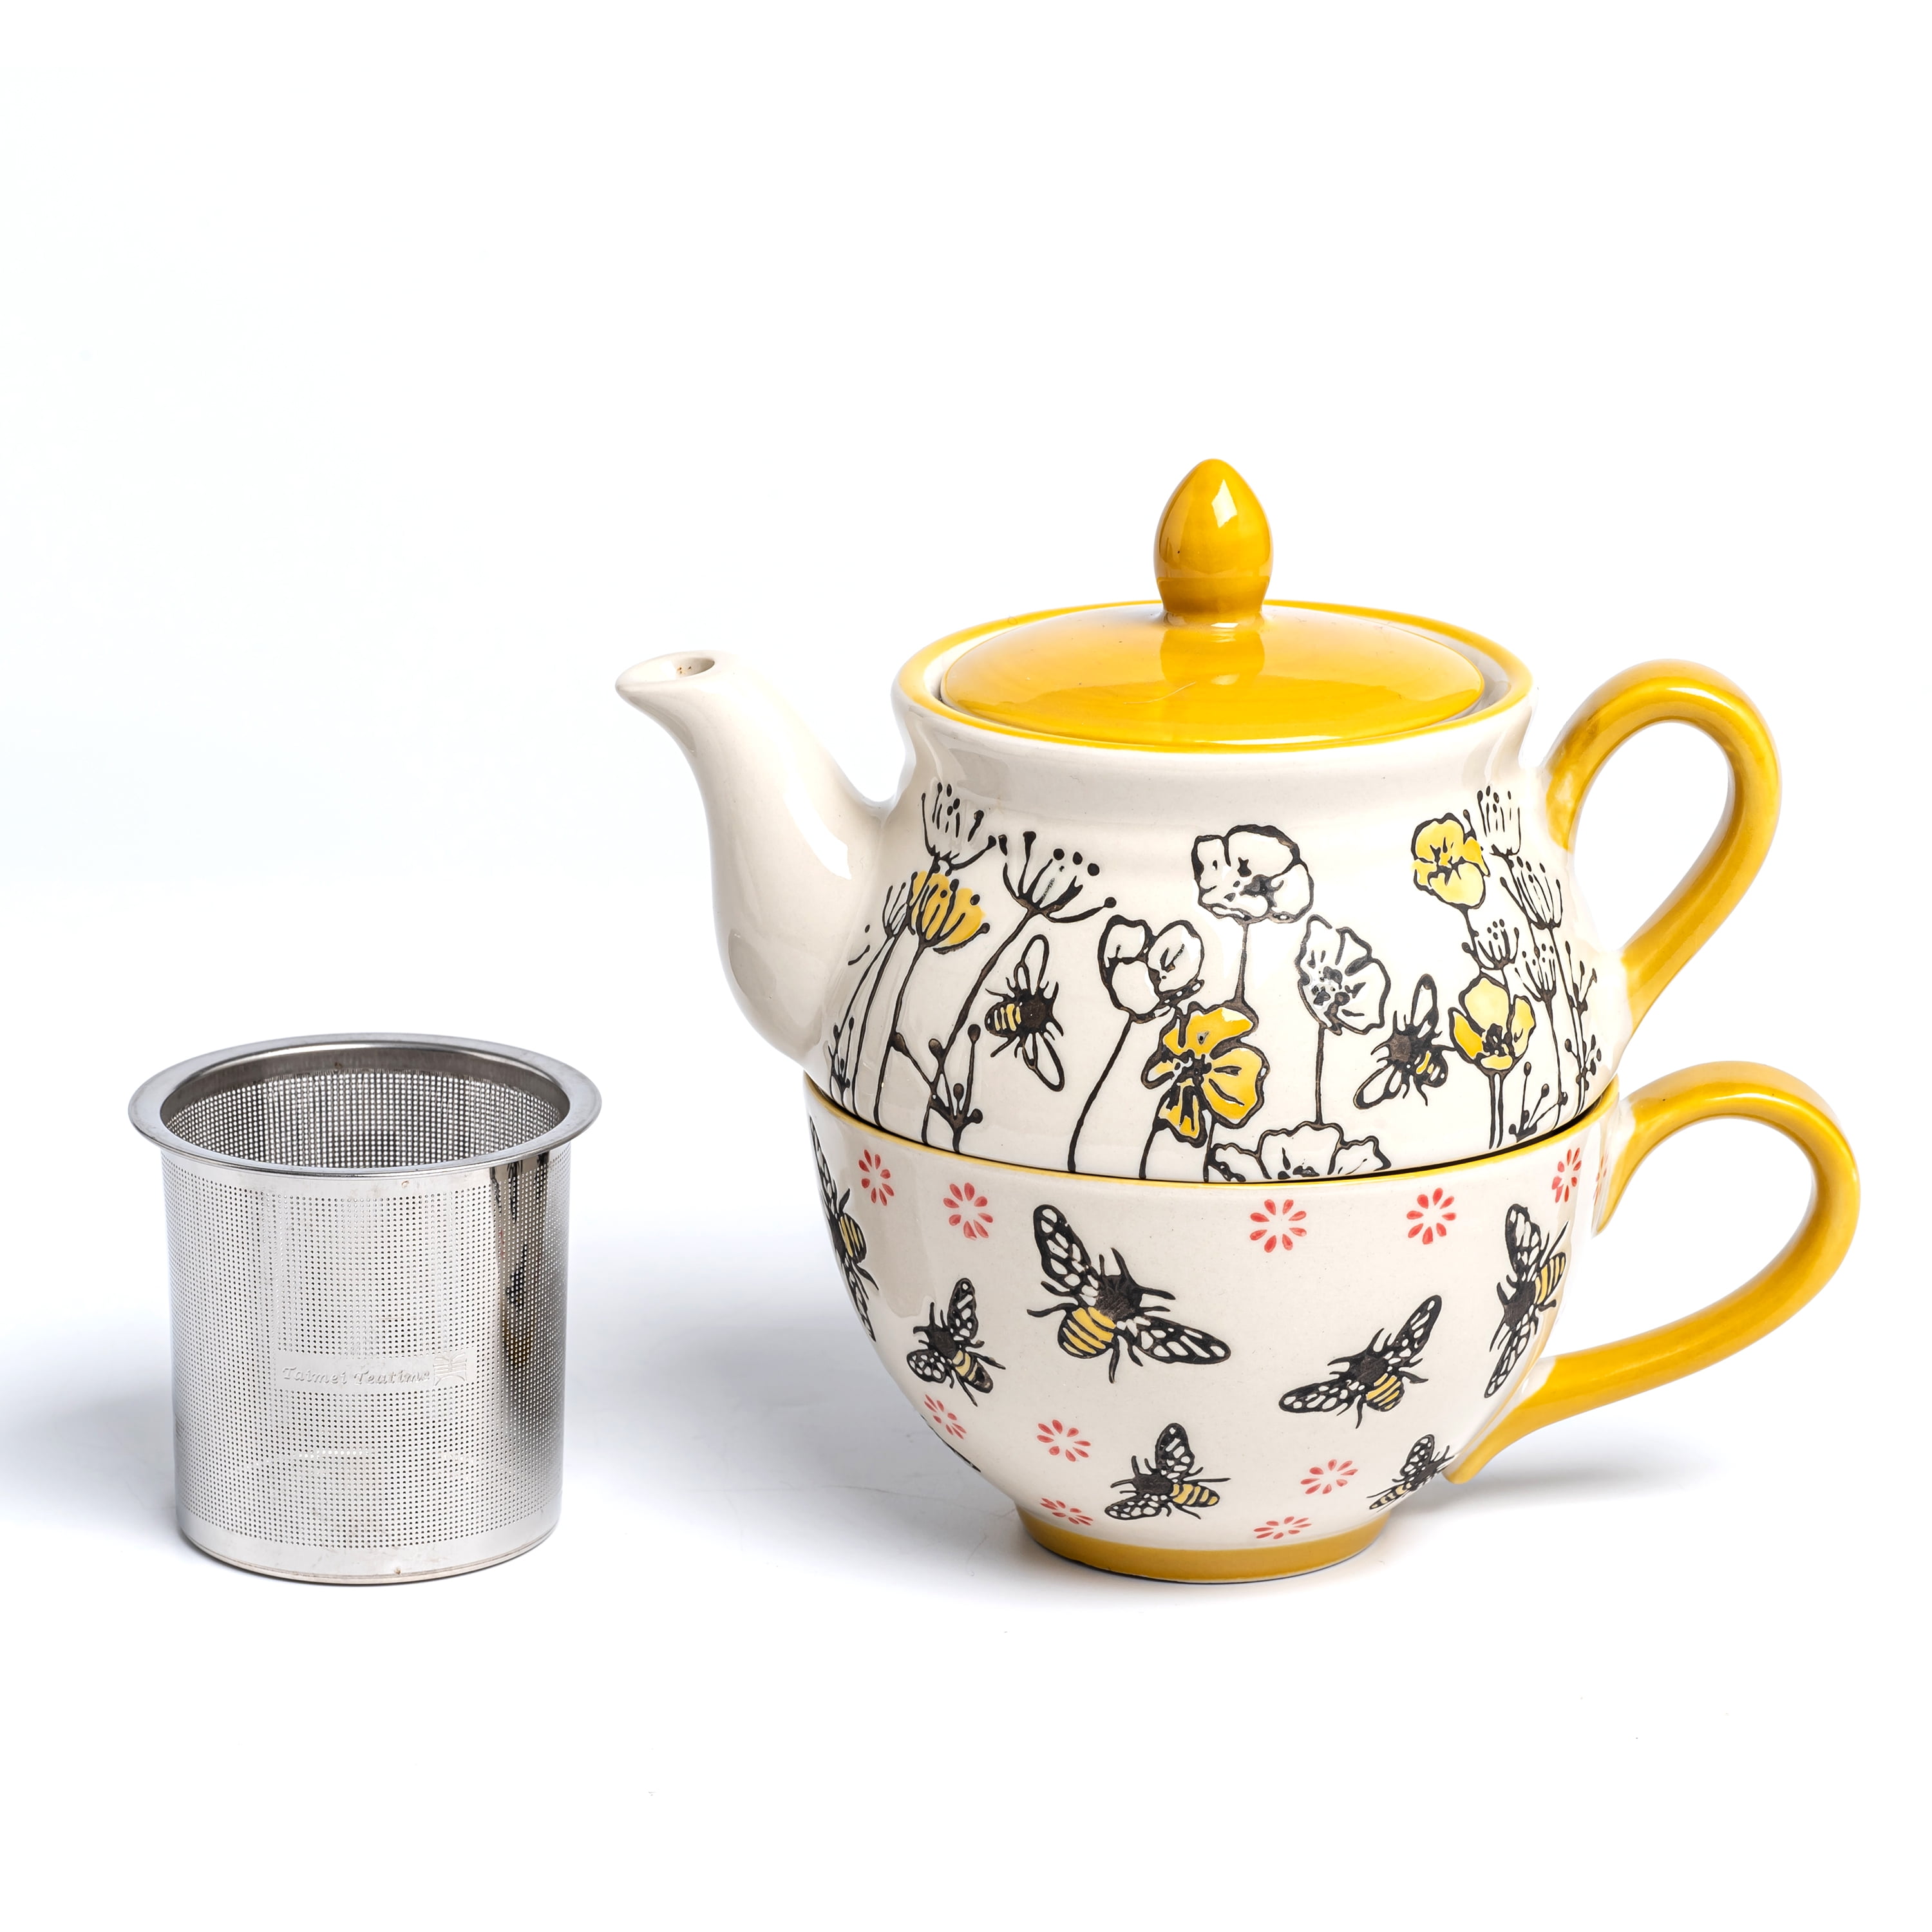 Cute Teapot Shaped Eco-Friendly Stainless Steel Tea Strainer - World Tea  Directory